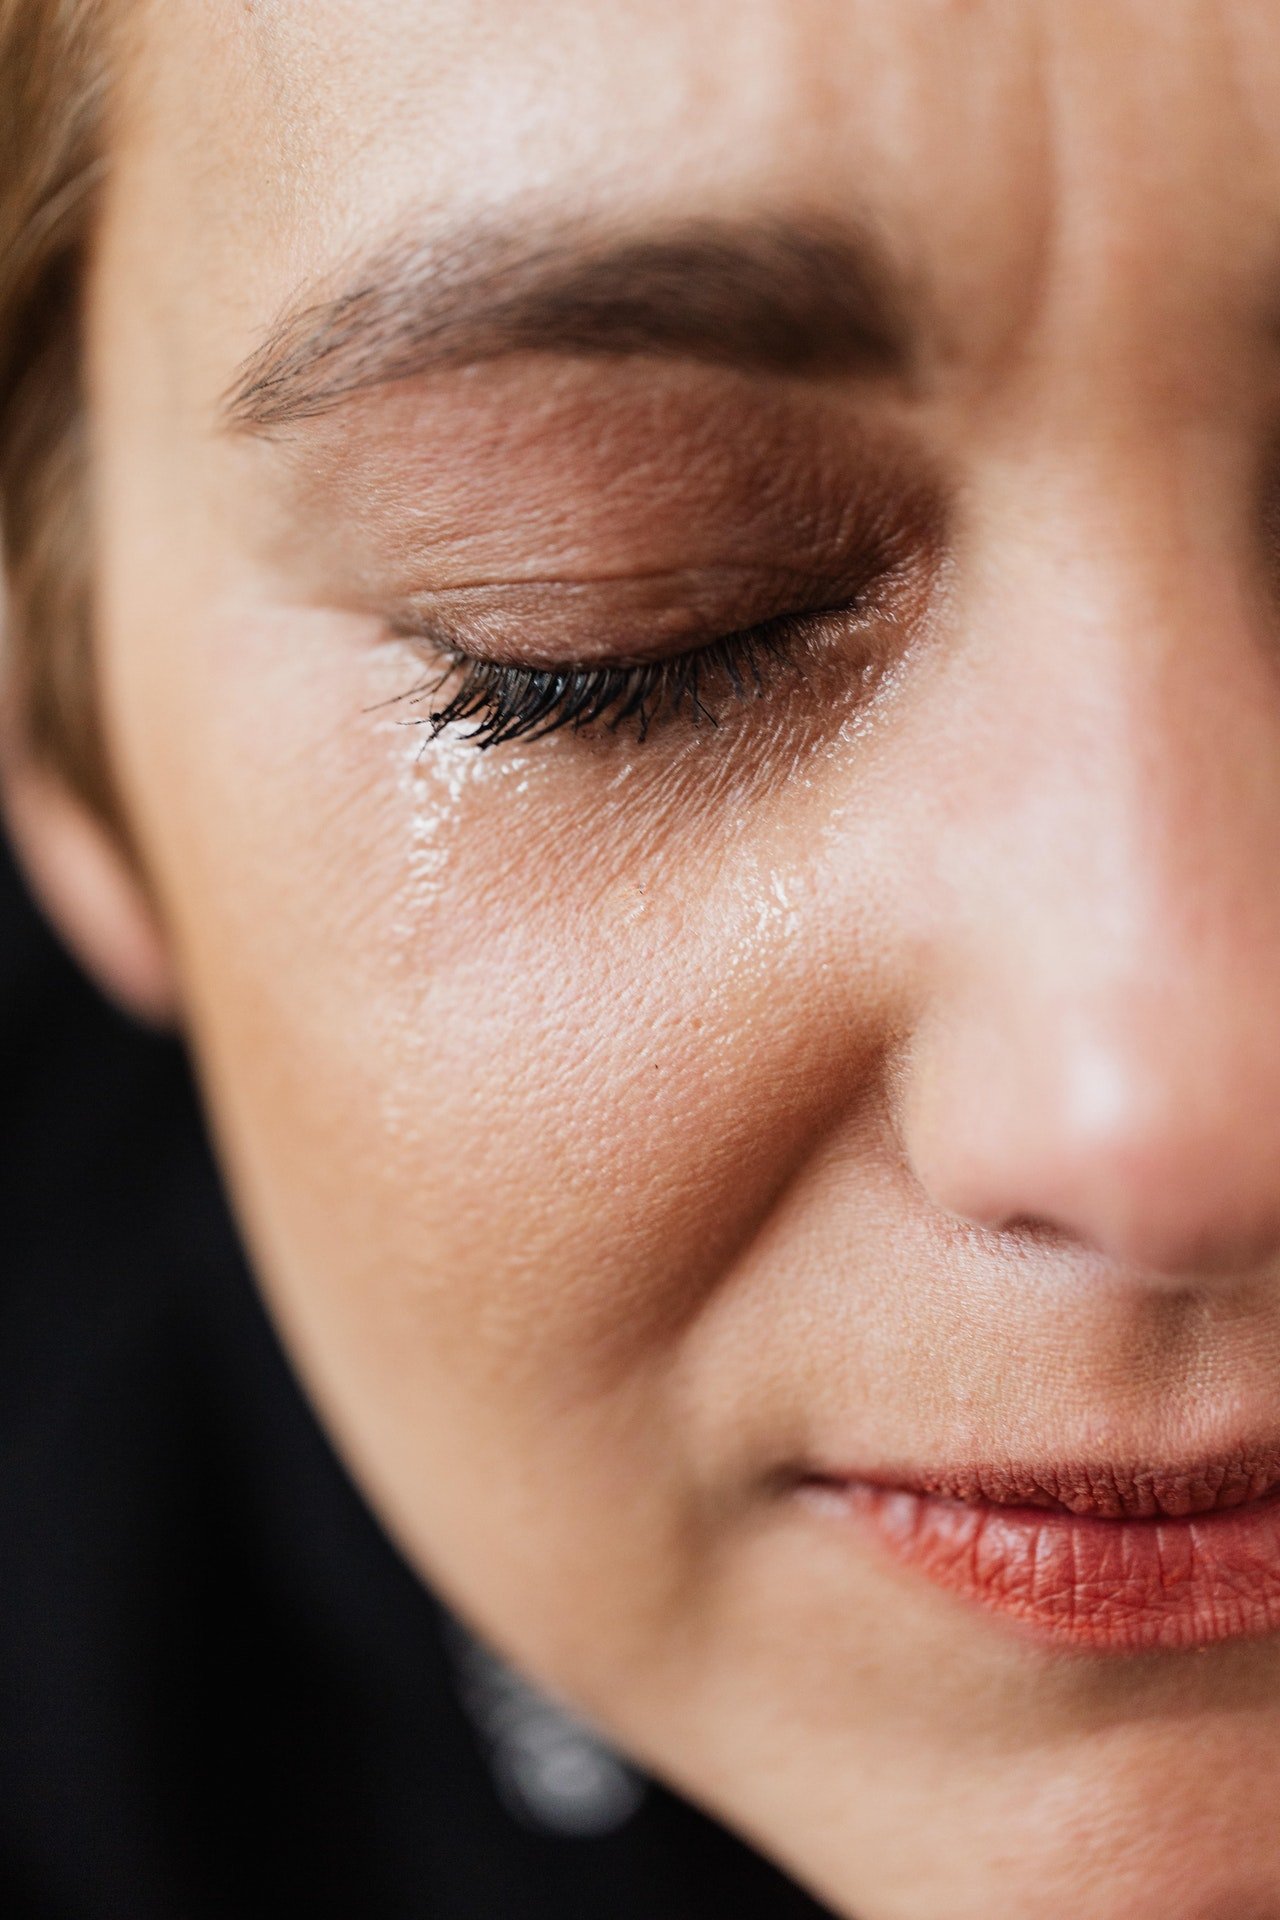 Woman with a teary face | Source: Pexels